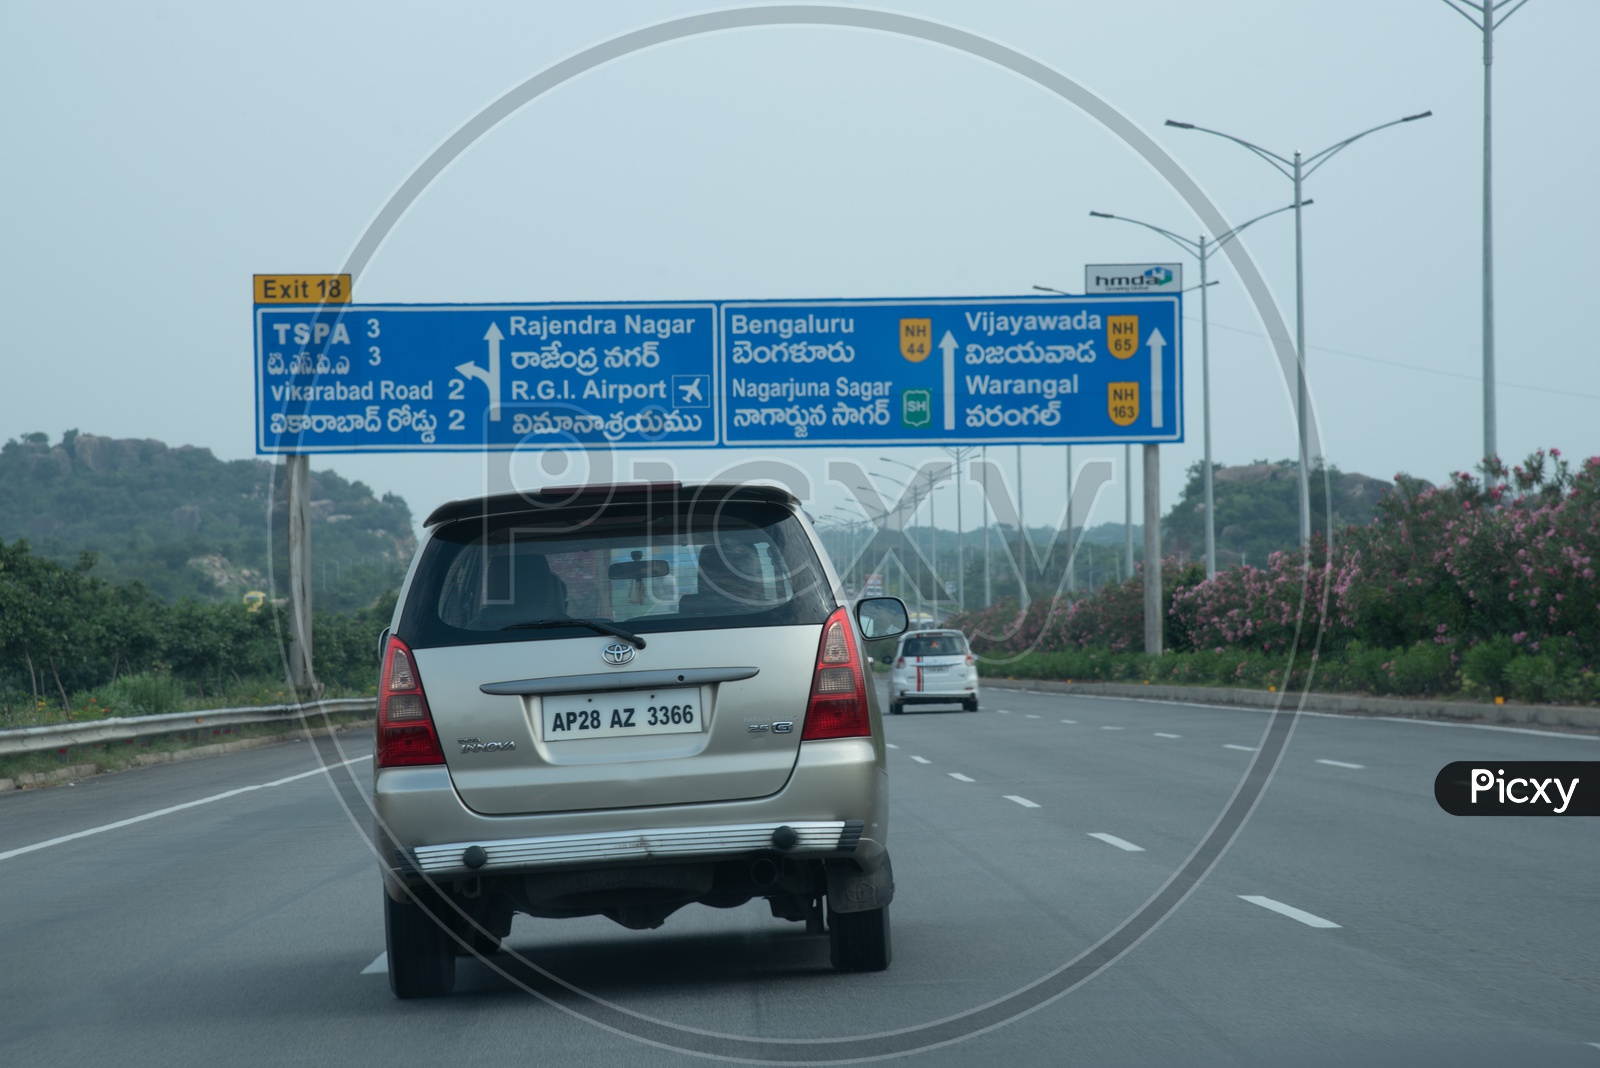 HGCL to refurbish traffic signages along the ORR